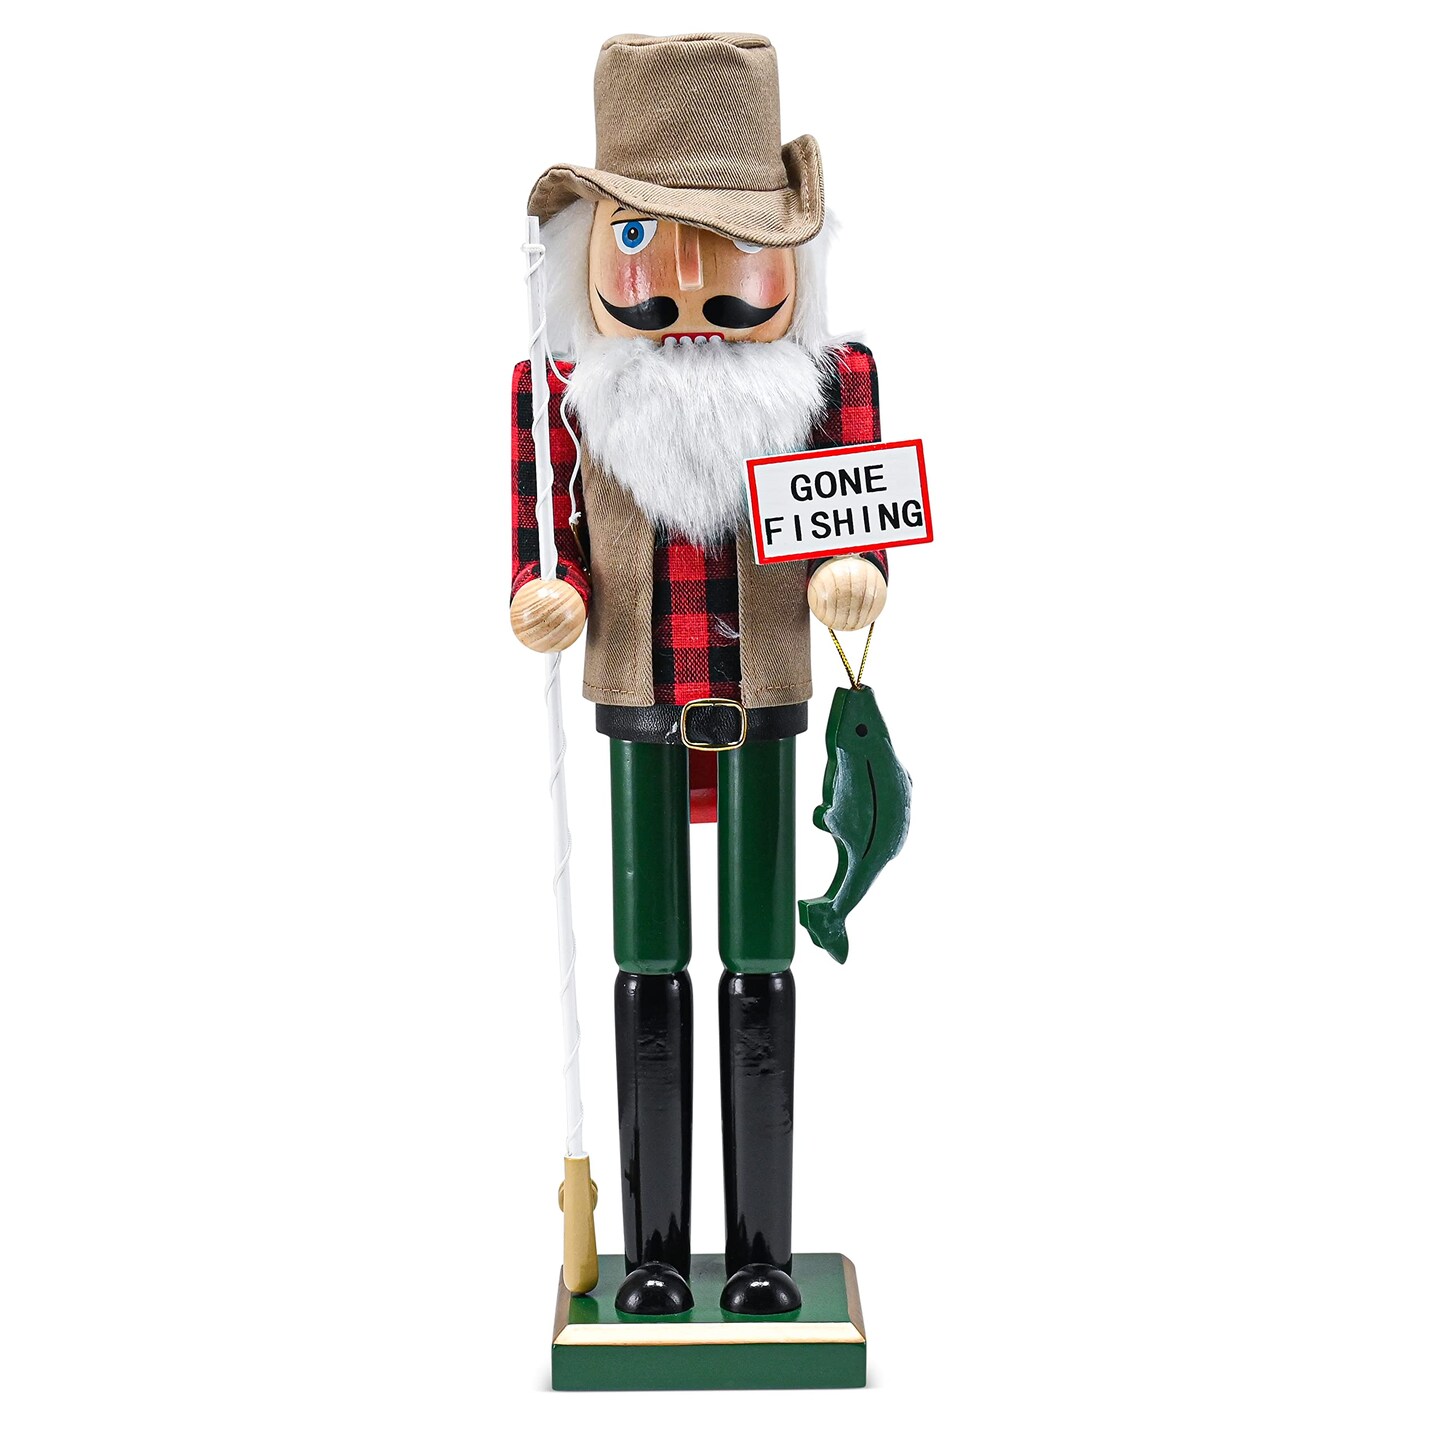 Ornativity Christmas Fisher Man Nutcracker – Red and Green Wooden